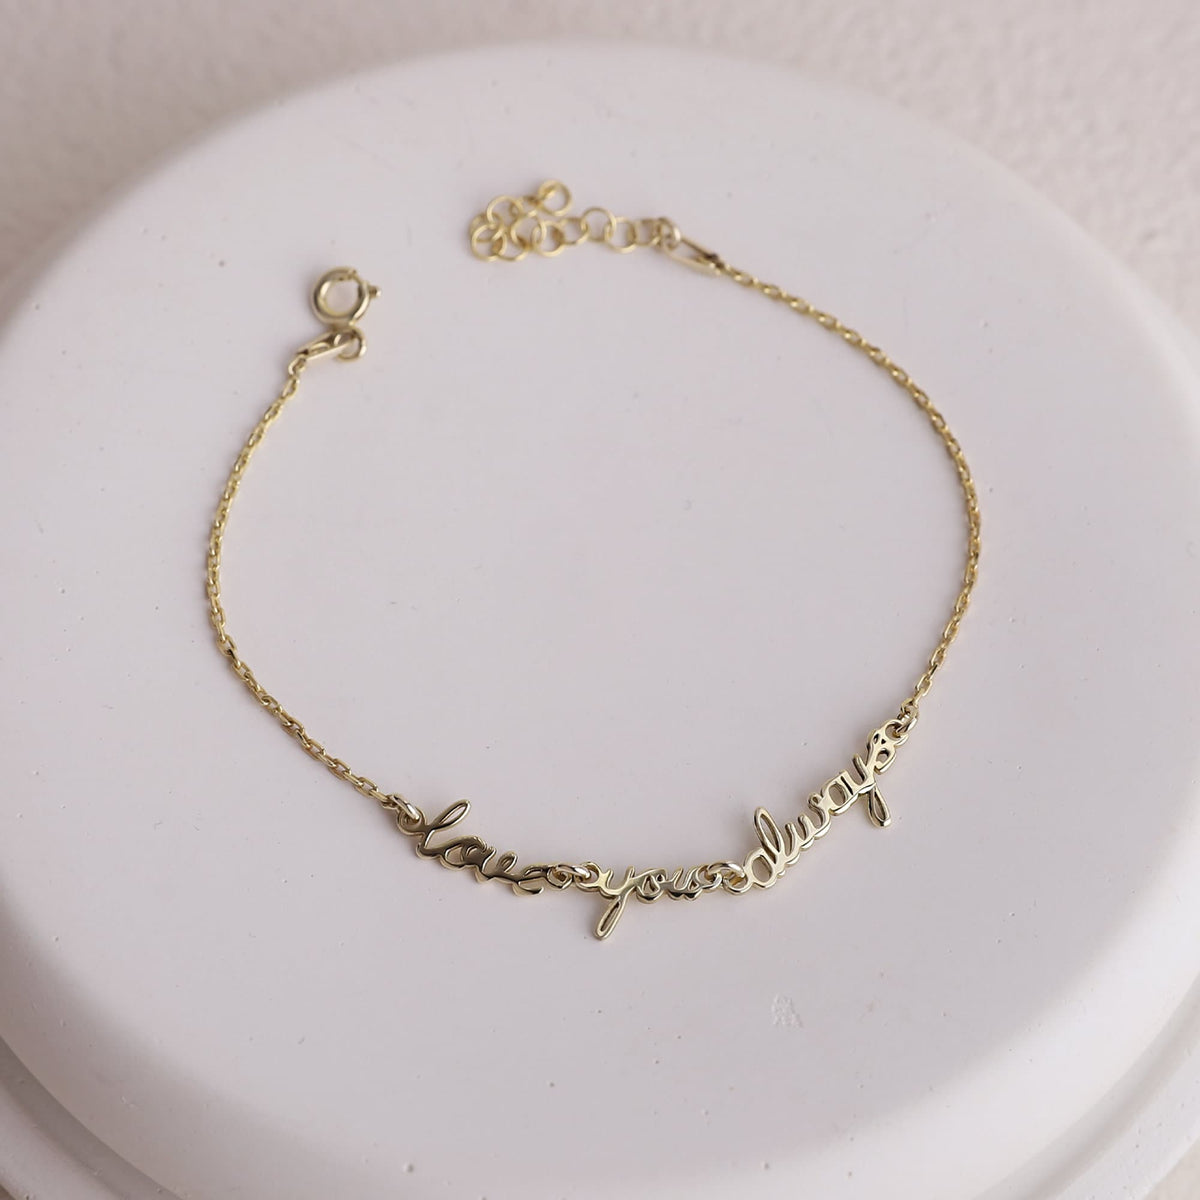 Custom Signature Name Bracelet, Dainty Gold Bracelet | Cute Actual Handwriting Sterling Silver Bracelet | Perfect Jewelry Gifts for Her